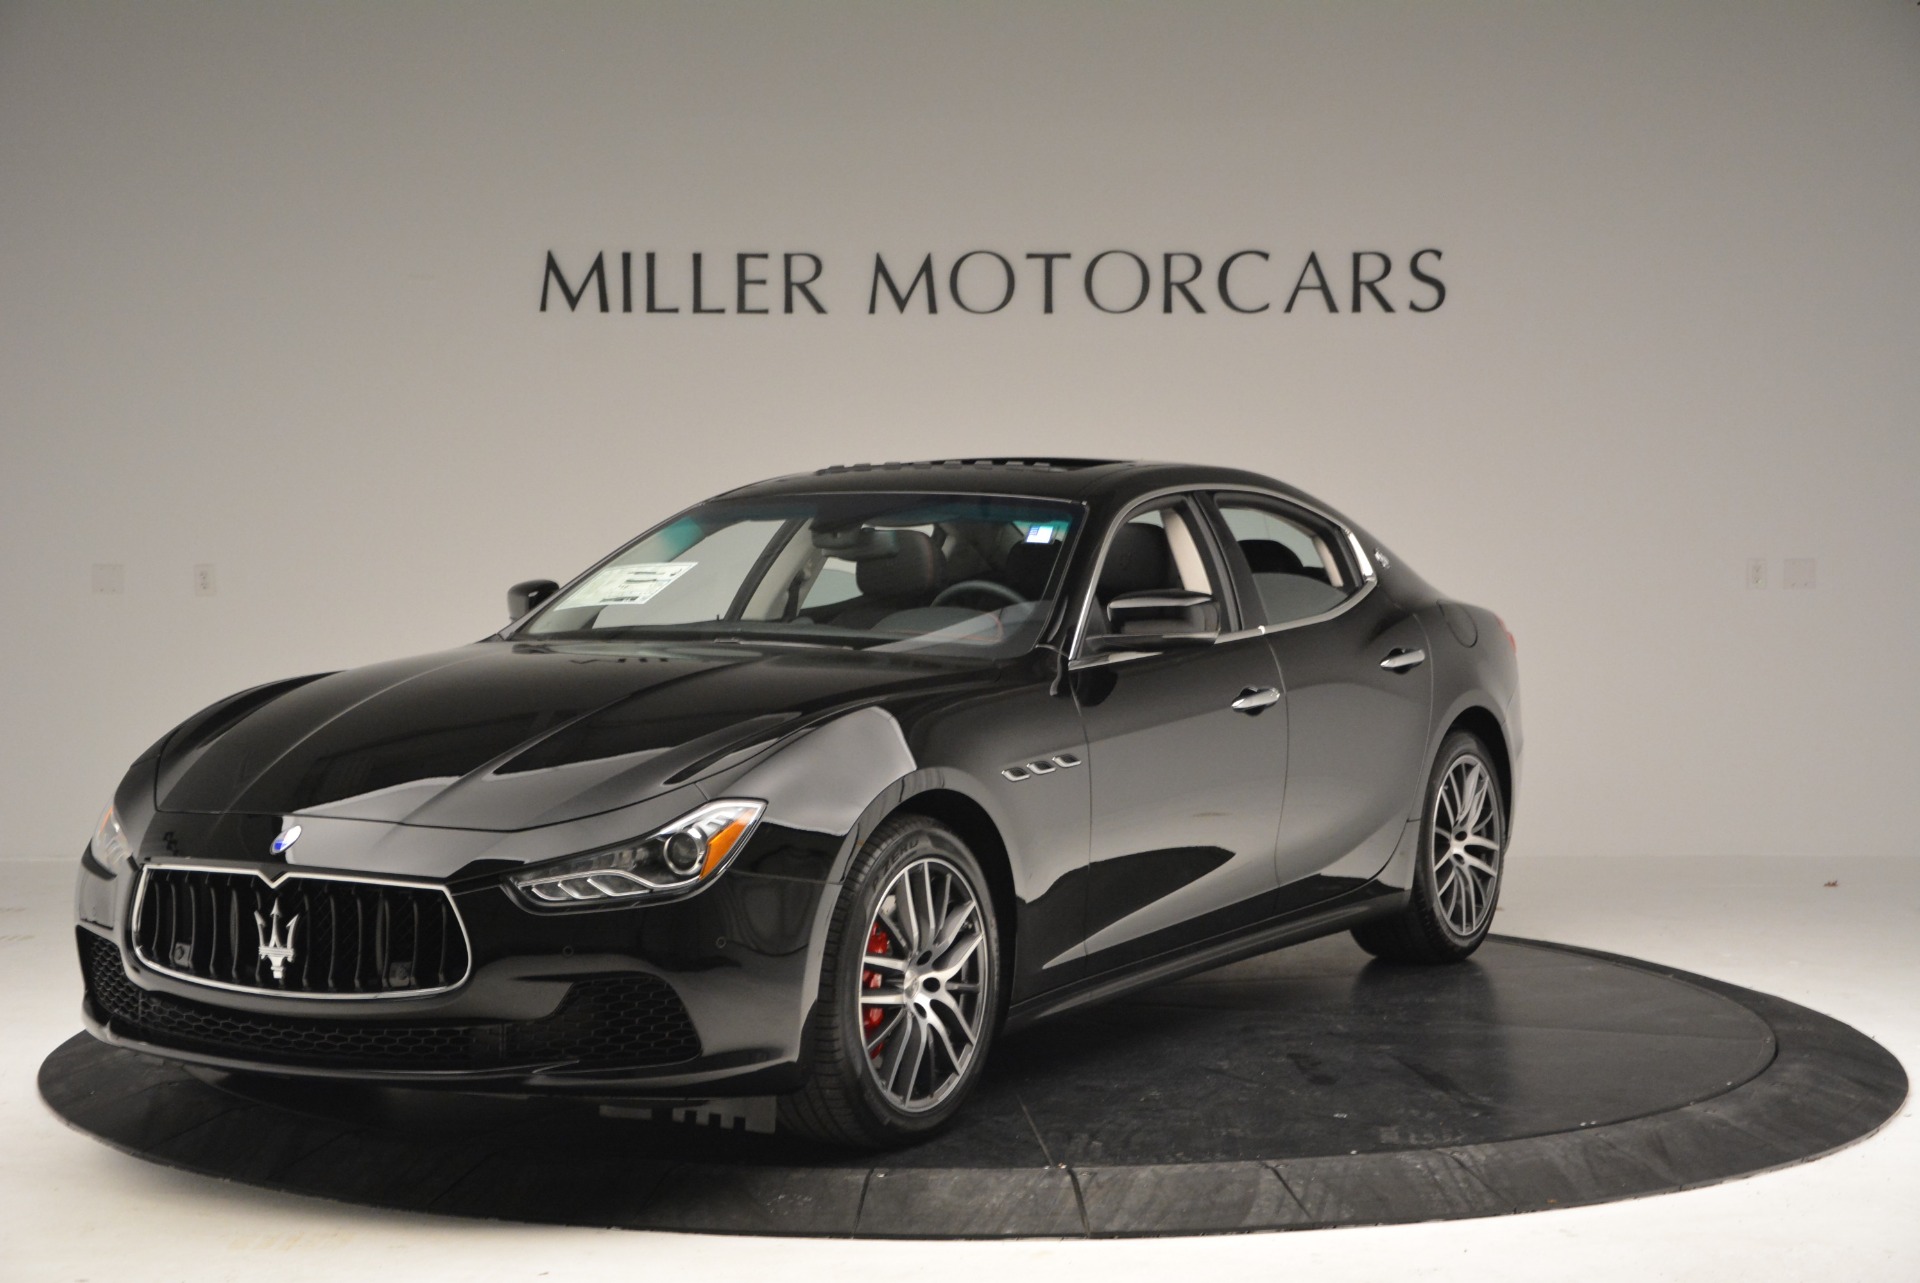 Used 2017 Maserati Ghibli S Q4 - EX Loaner for sale Sold at Alfa Romeo of Greenwich in Greenwich CT 06830 1